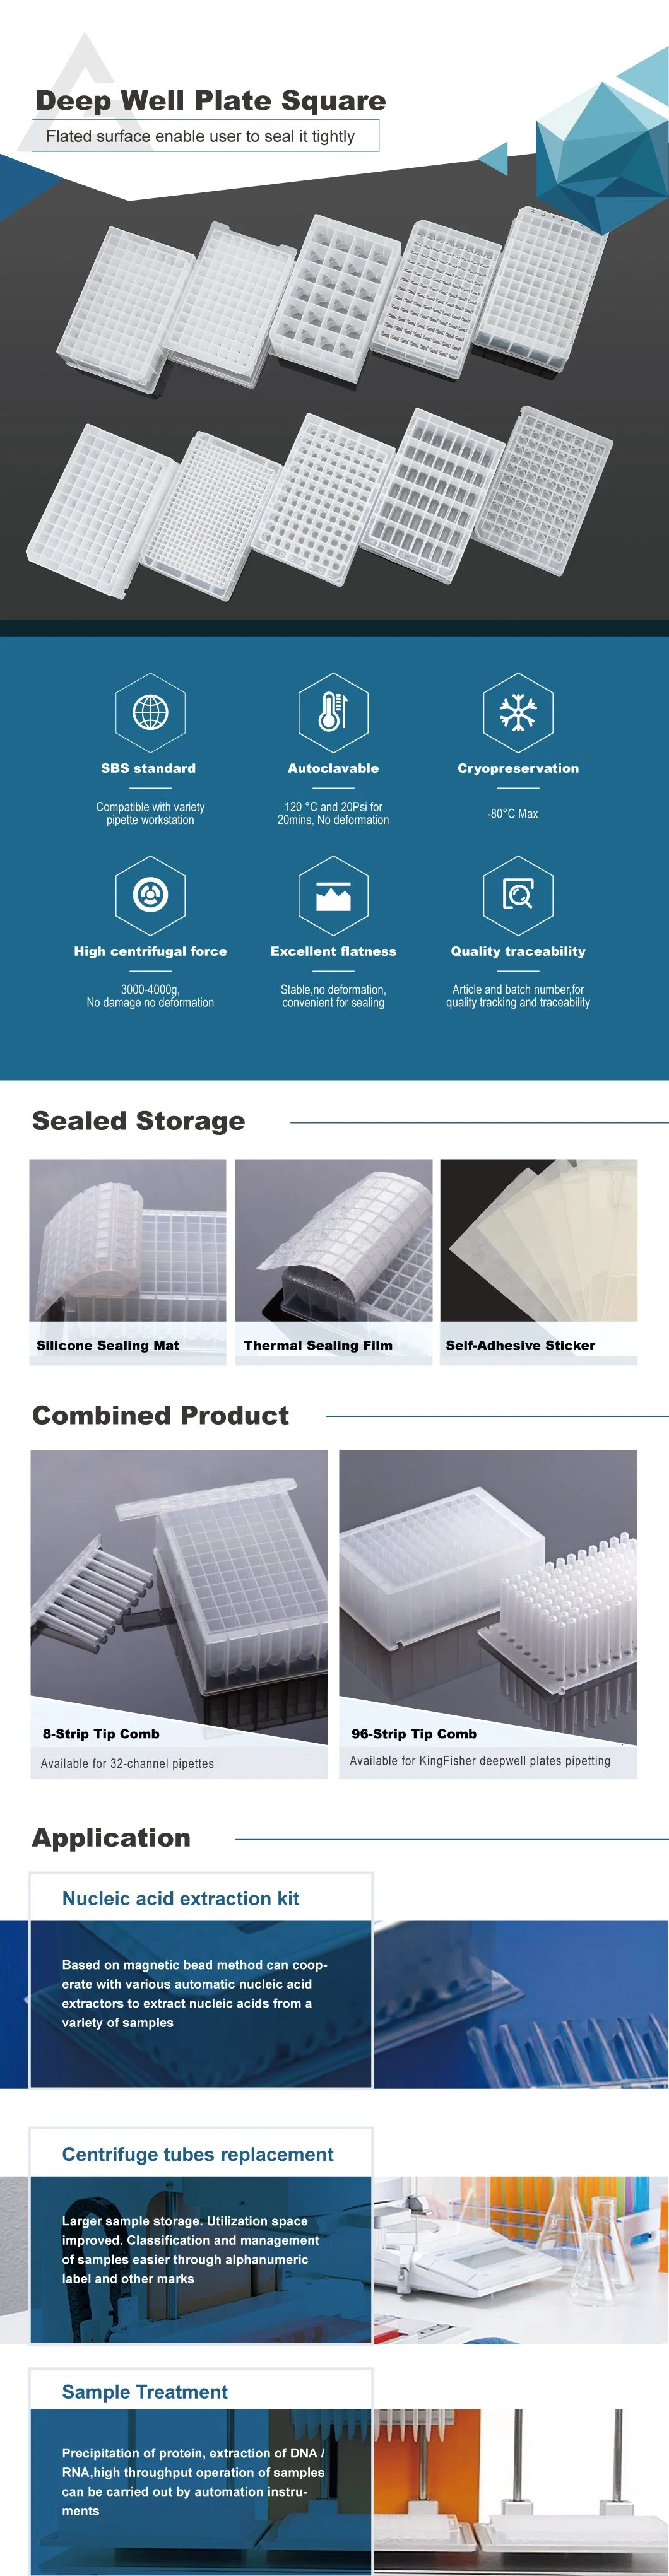 High Chemical Stability V Bottom 120UL Plastic Lab Consumables Sterile Low Retention 384 PP Square Deep Well Plate